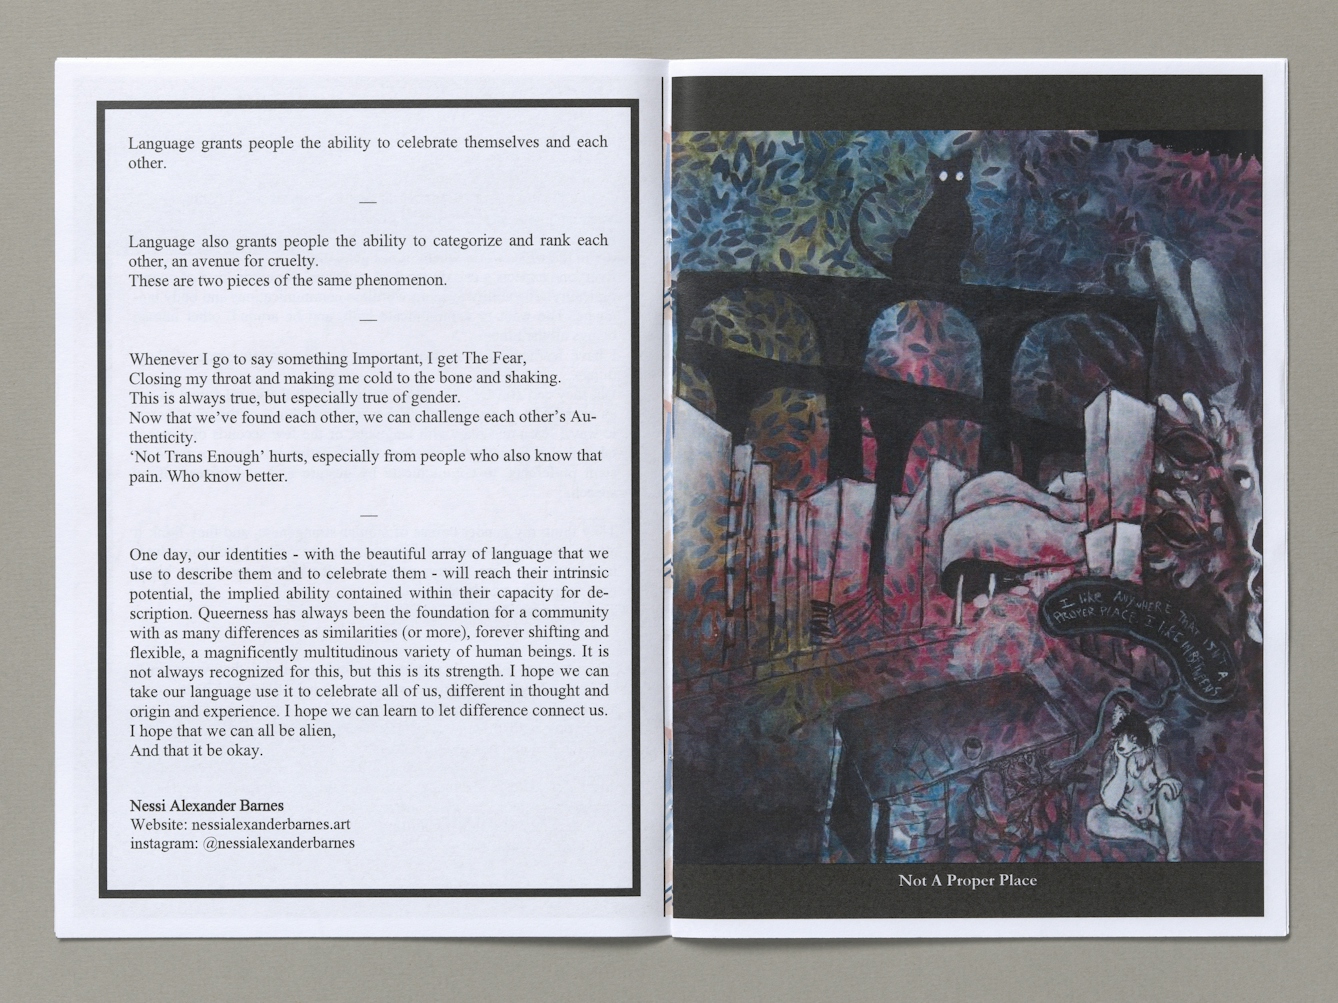 A two-page spread from a zine with typed text on the left side and a dark artwork on the right side. The image shows a a mottled patterned background with a black silouhette of a multi-arched bridge or viaduct with a large black cat sitting on it. Below this is a modern white cityscape and below that a naked figure with a bat-like face, sits on the floor next to a large desk, looking towards the desk. A speech bubble comes from a shadowy figure crouched under the desk saying "I like anywhere that isn't a proper place. I like inbetweens".